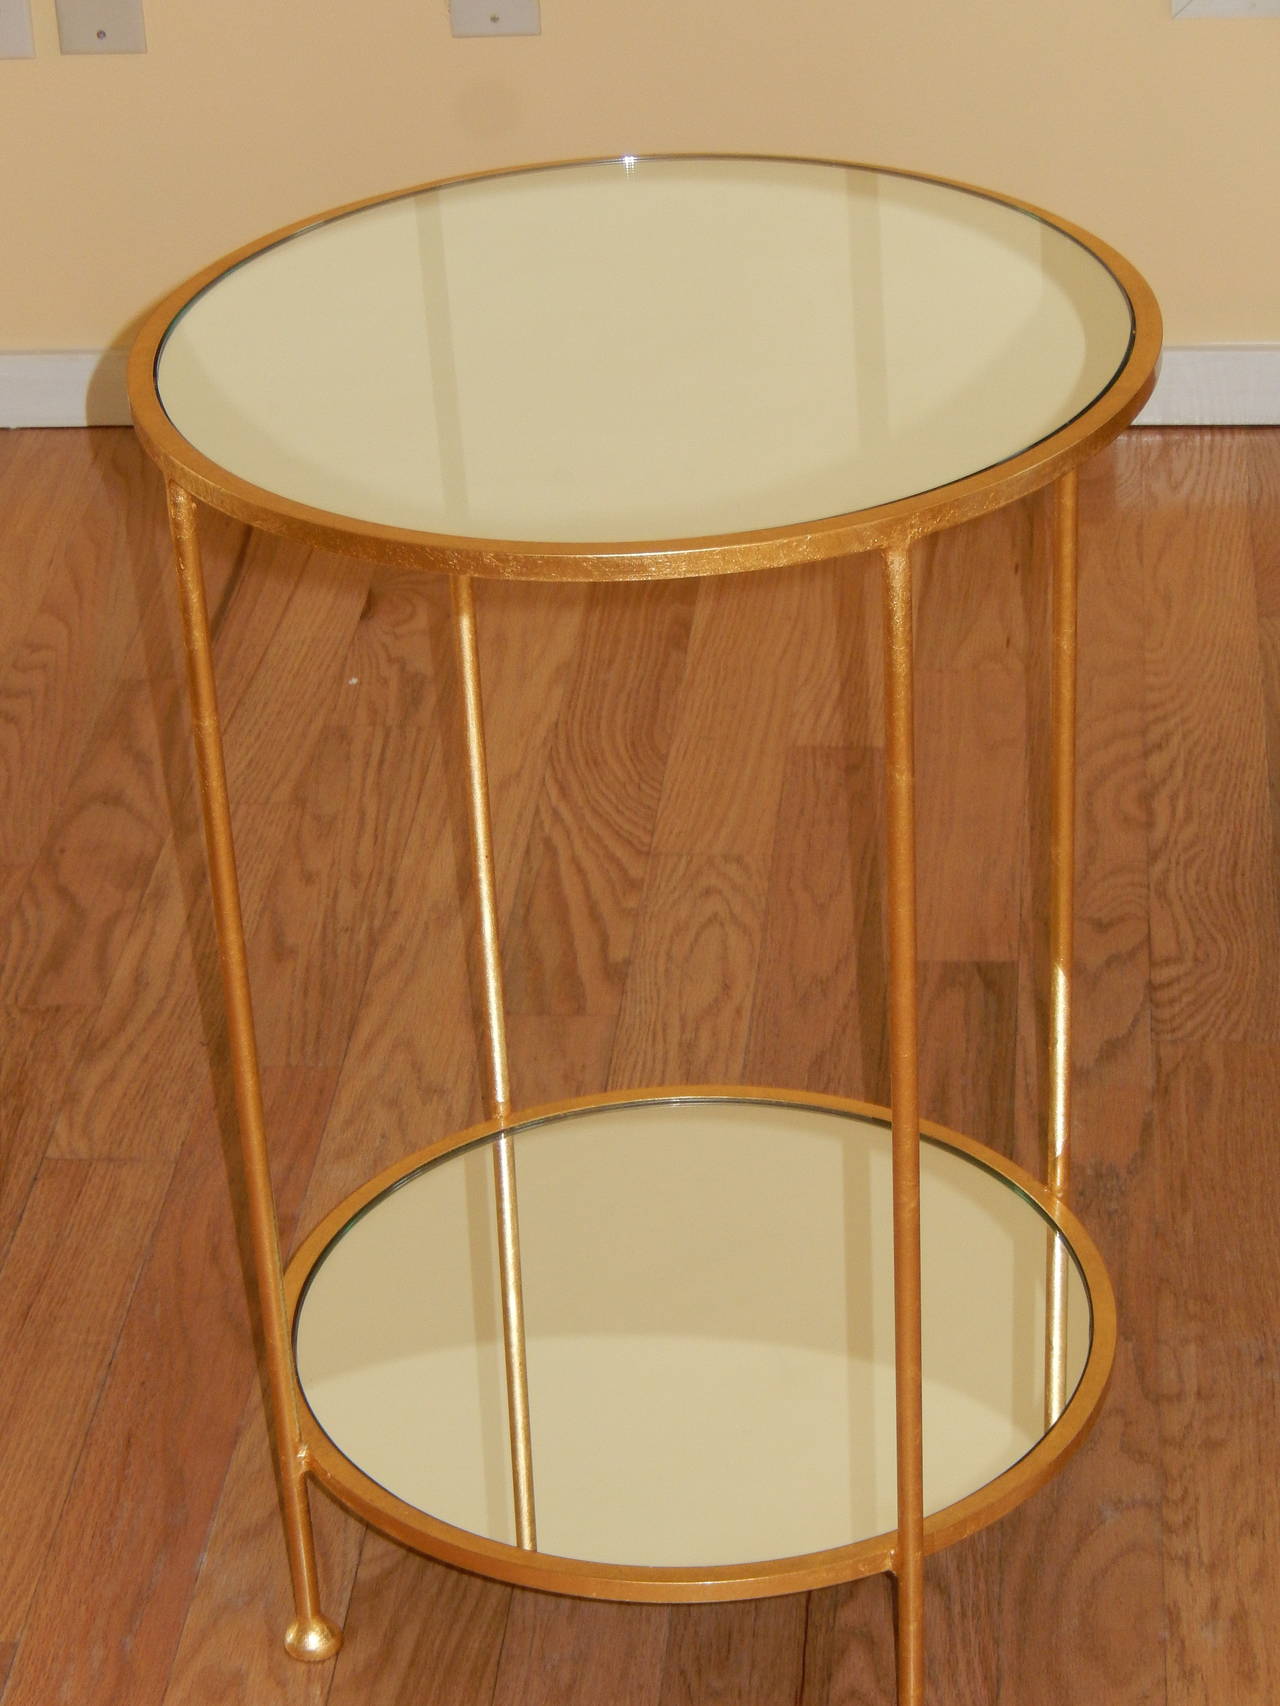 Patinated A Mirrored Two Level Side Table